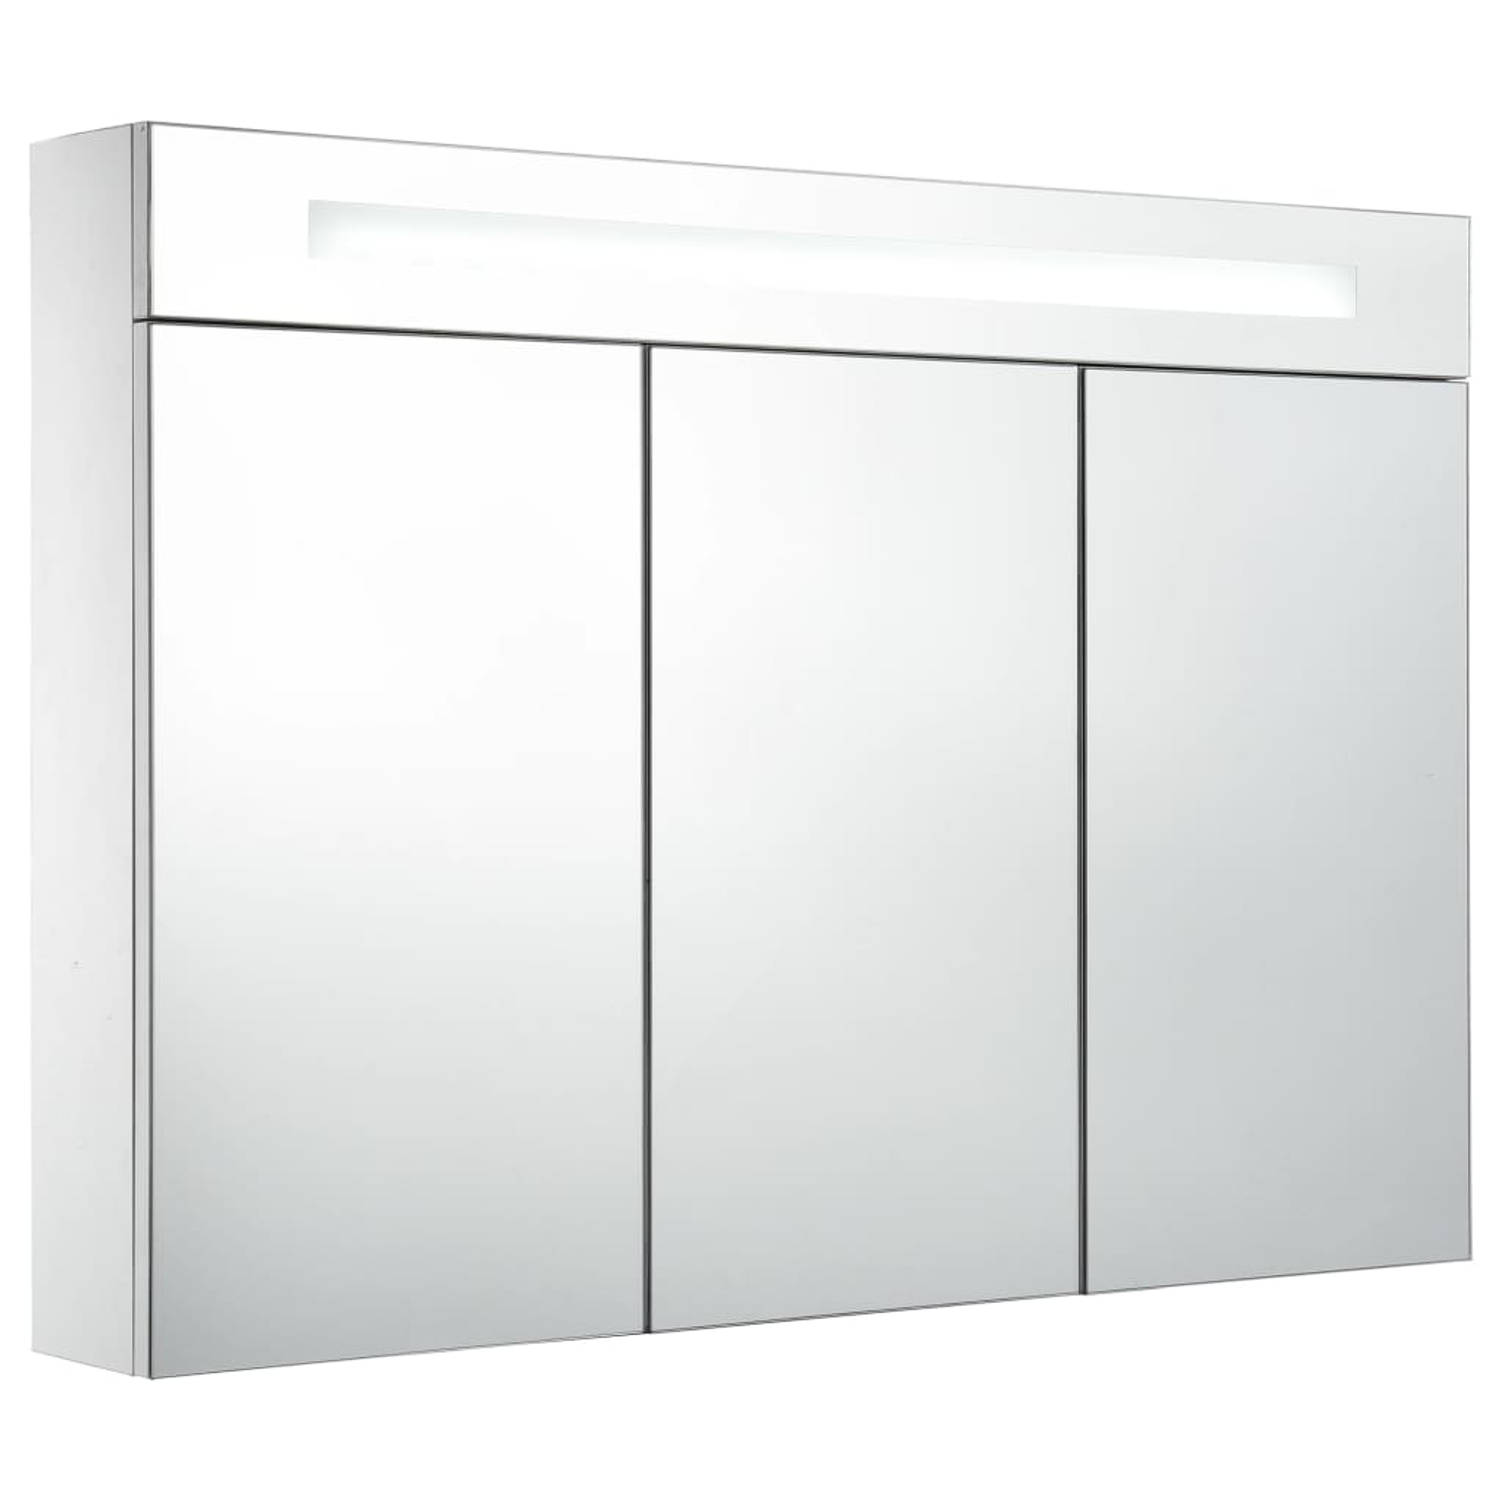 The Living Store LED-wandspiegelkast Wit/Zilver MDF 88x13x62cm USB-interface